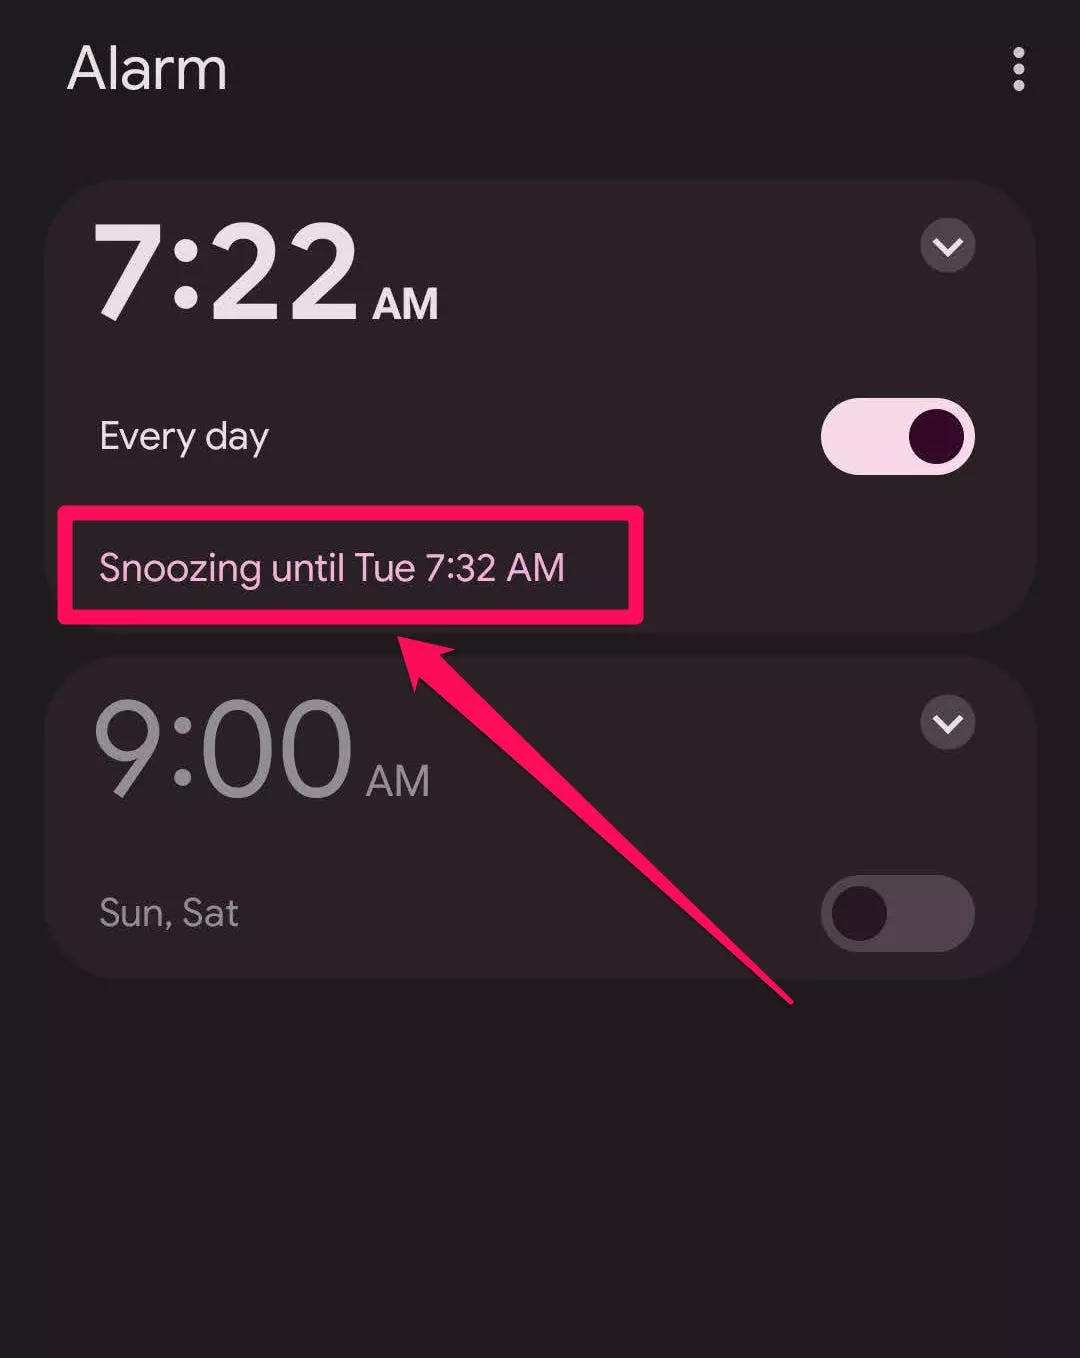 How to cancel or delete an alarm on an Android or iPhone